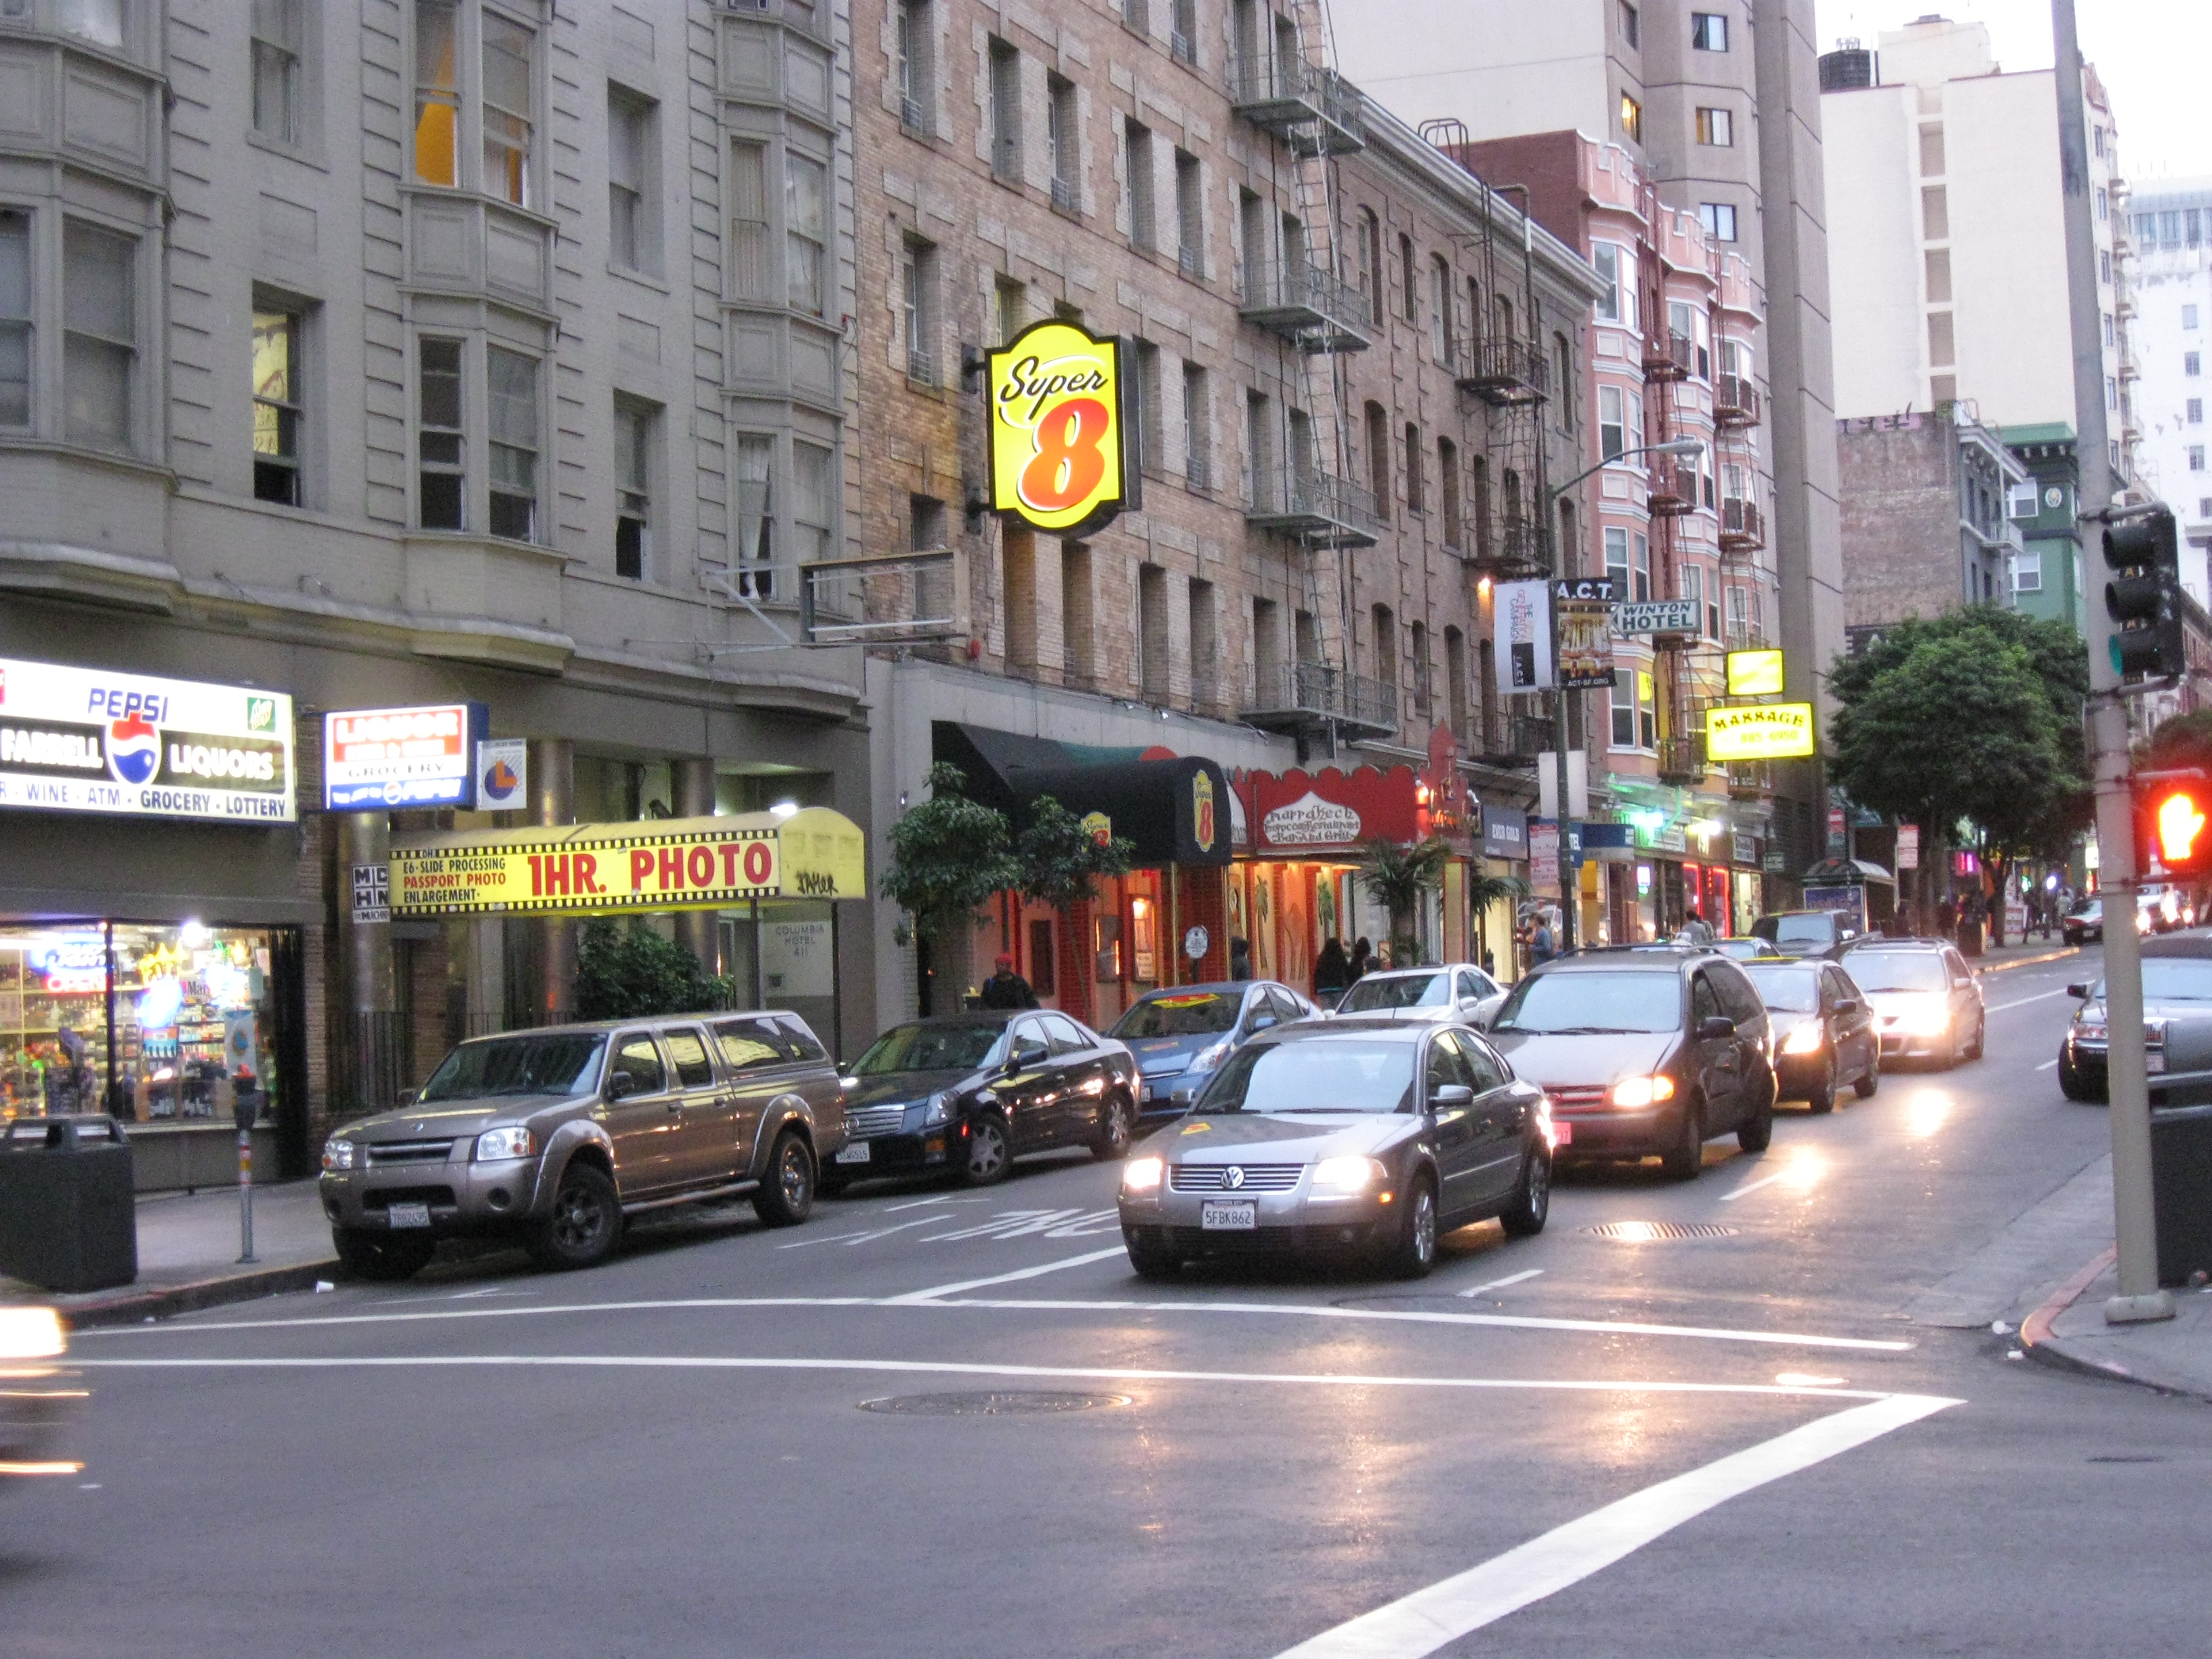 Street in Tenderloin District in San Francisco, Car, Cars images, Intersection, Outdoor, HQ Photo